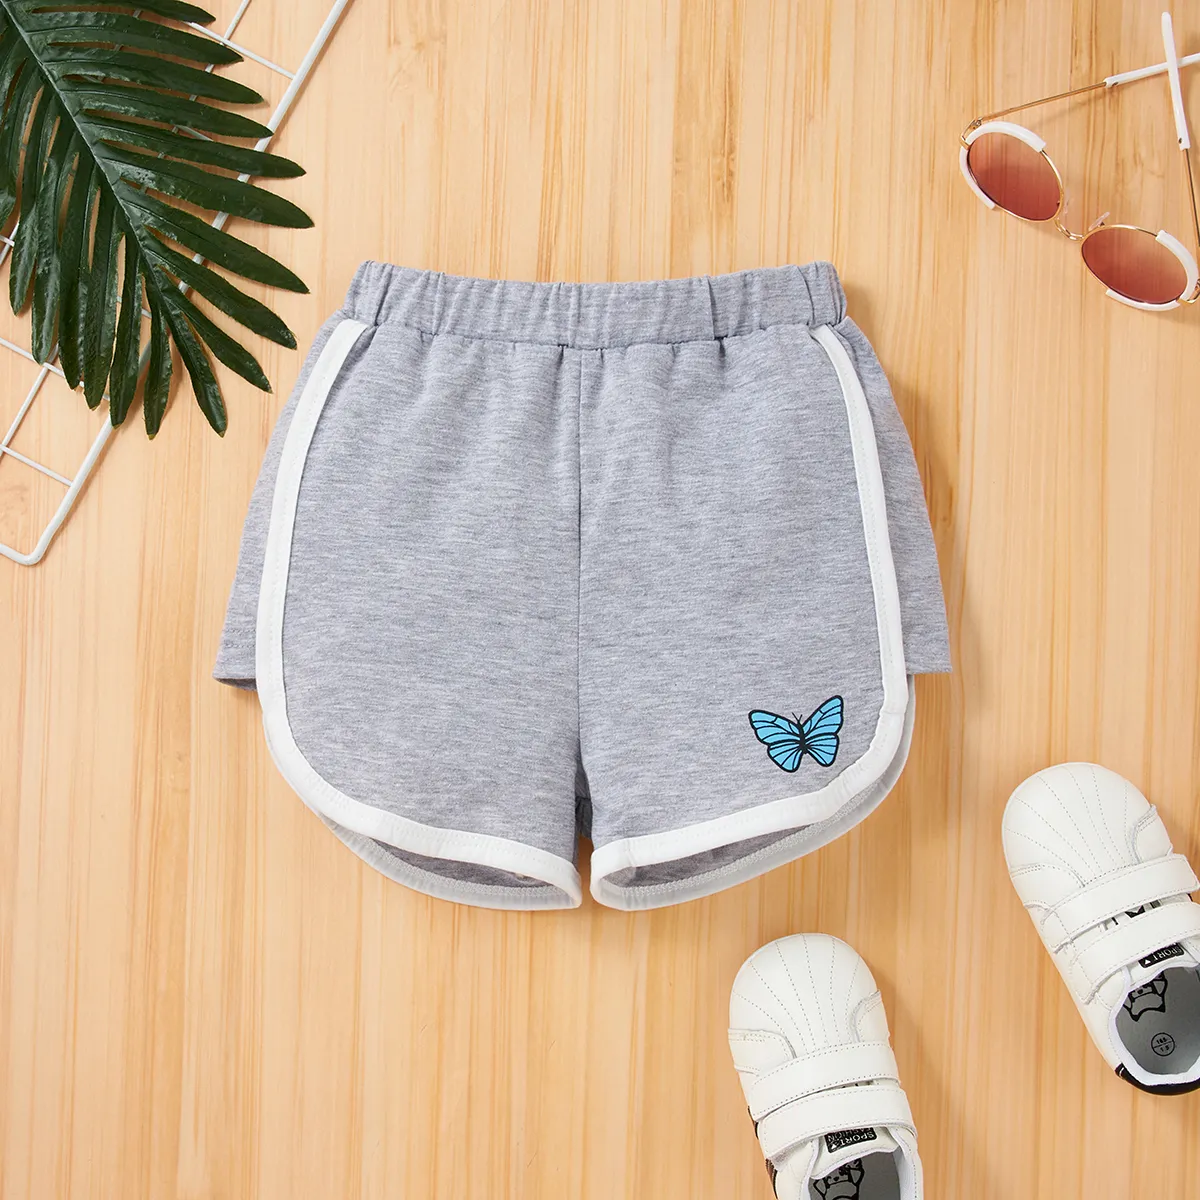 Toddler Girl Butterfly Print Shorts Grey big image 1